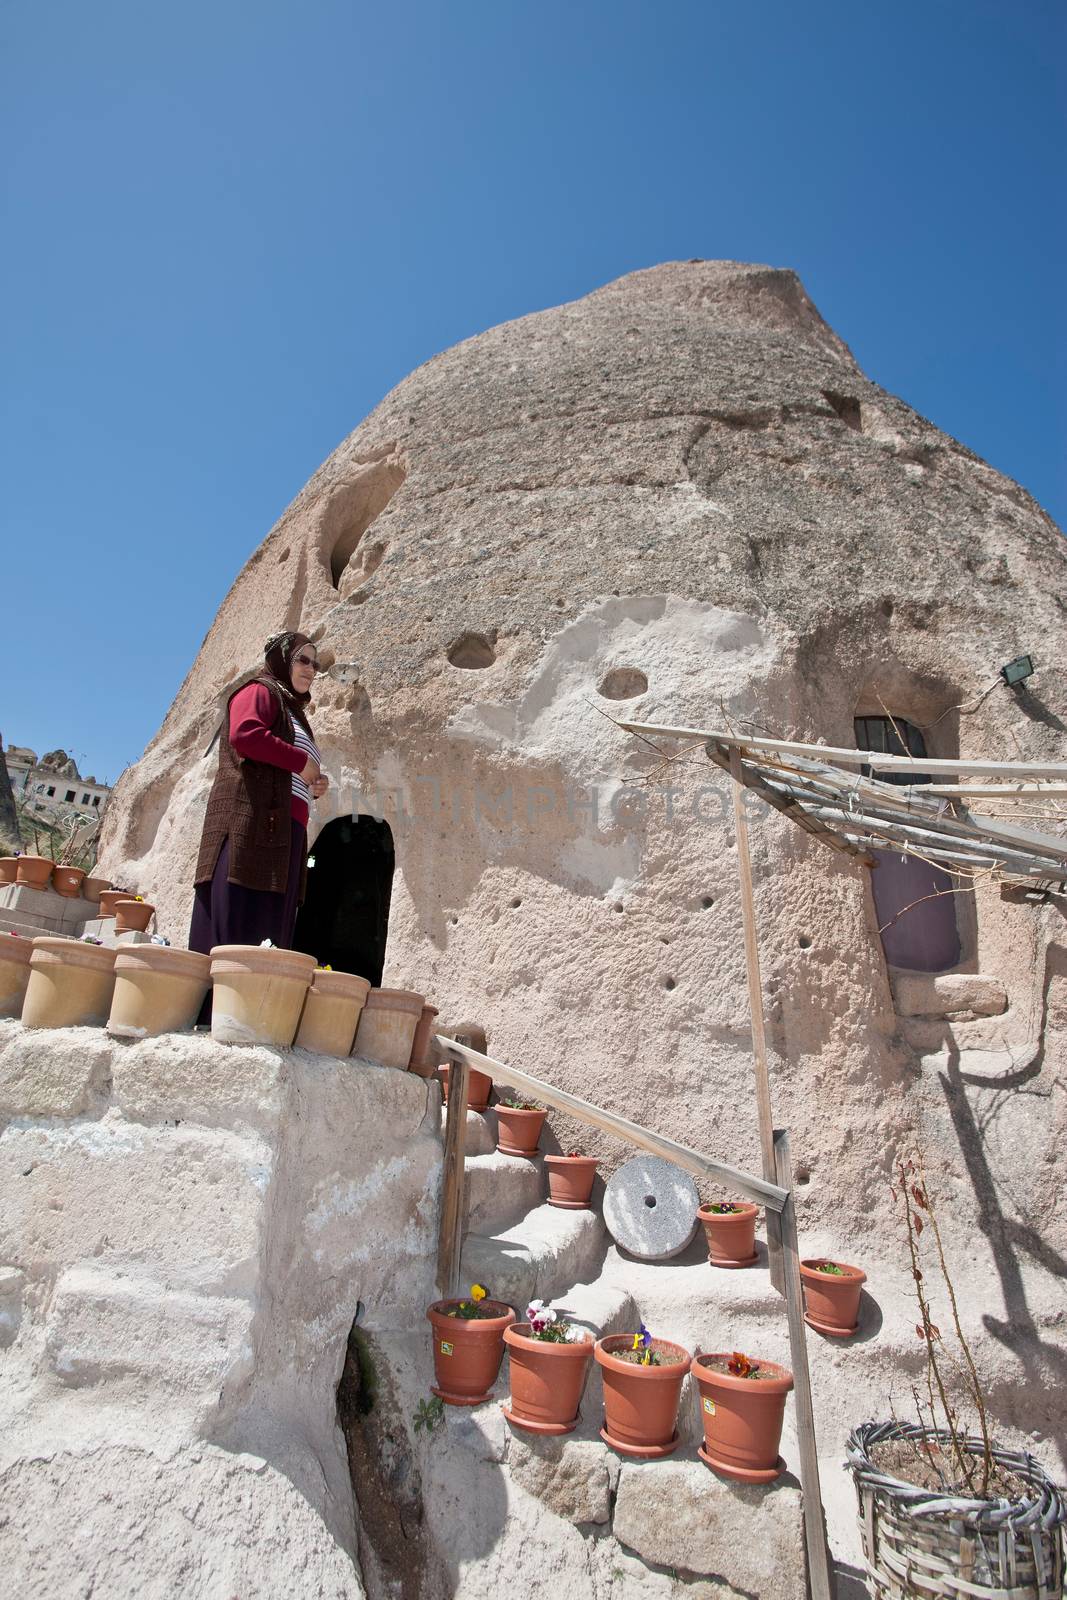 CAPPADOCIA, TURKEY – APRIL 16: Woman with flower pots decorating her cave home on April 16, 2012 in Cappadocia, Turkey prior to Anzac Day.  